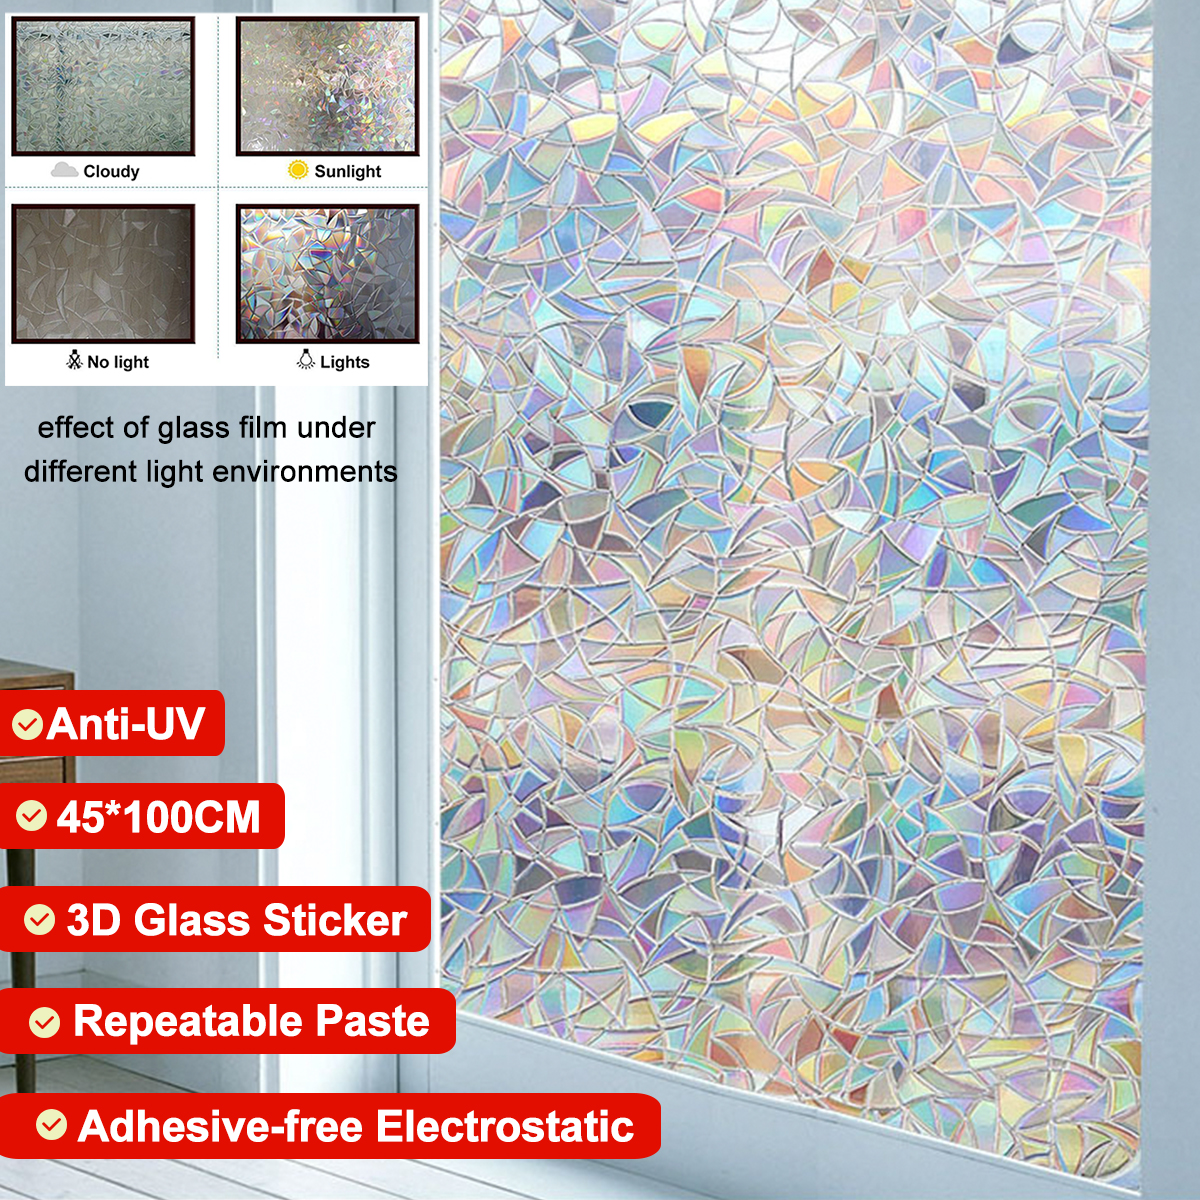 45100cm-3D-Glass-Sticker-Adhesive-free-Electrostatic-Glass-Film-Anti-UV-For-Home-Office-1719664-6